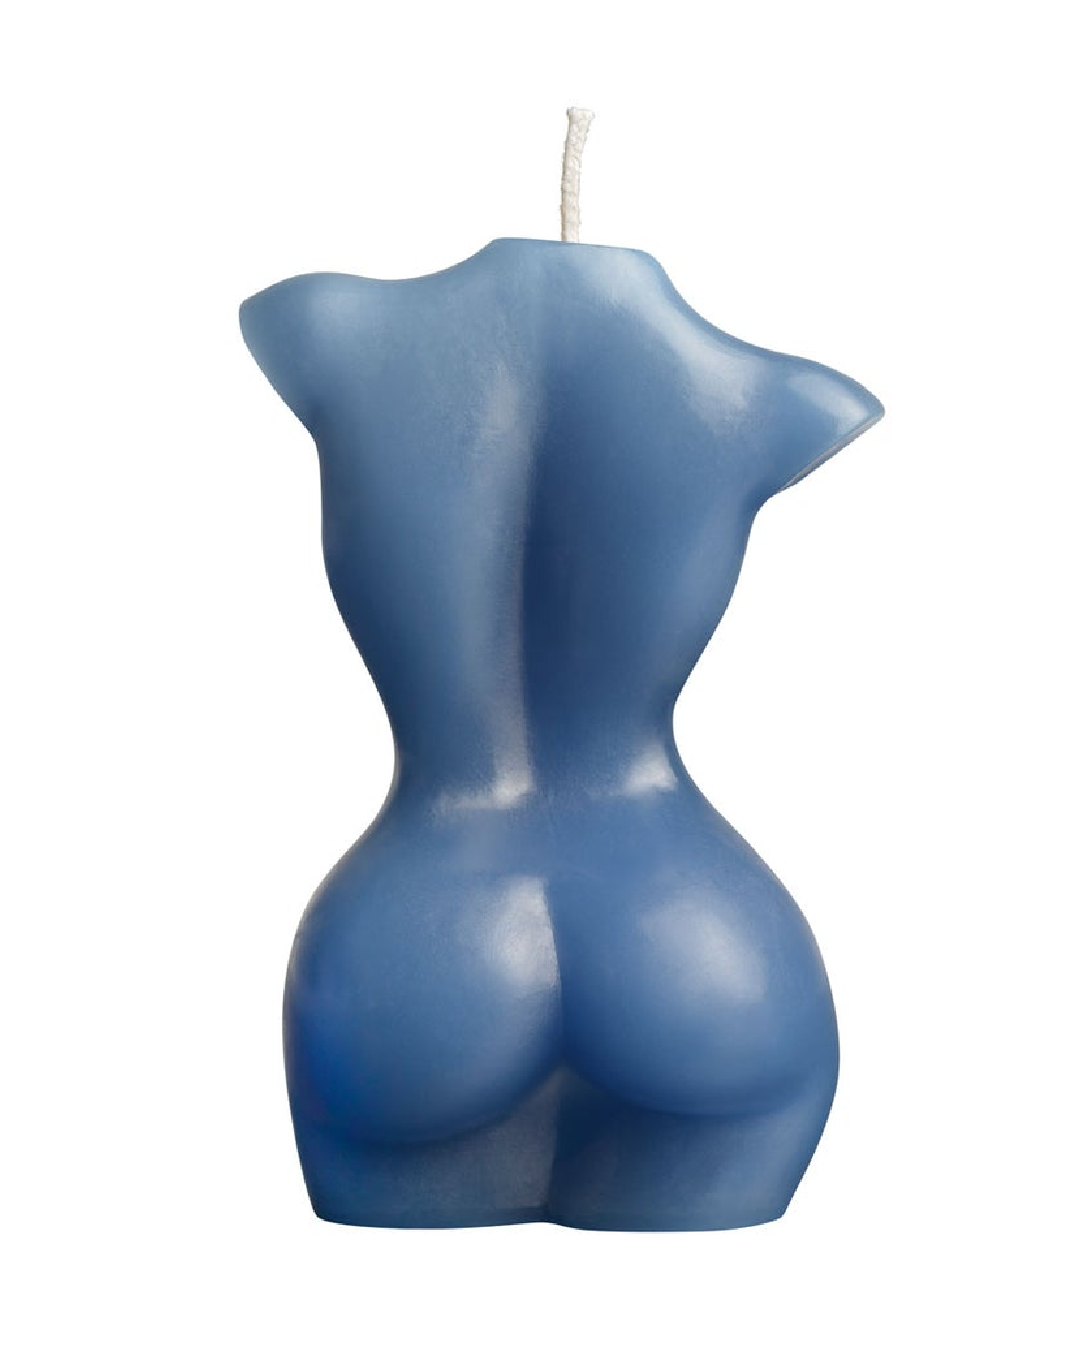 Lacire Torso Form 3 Drip Candles back view showing buttocks